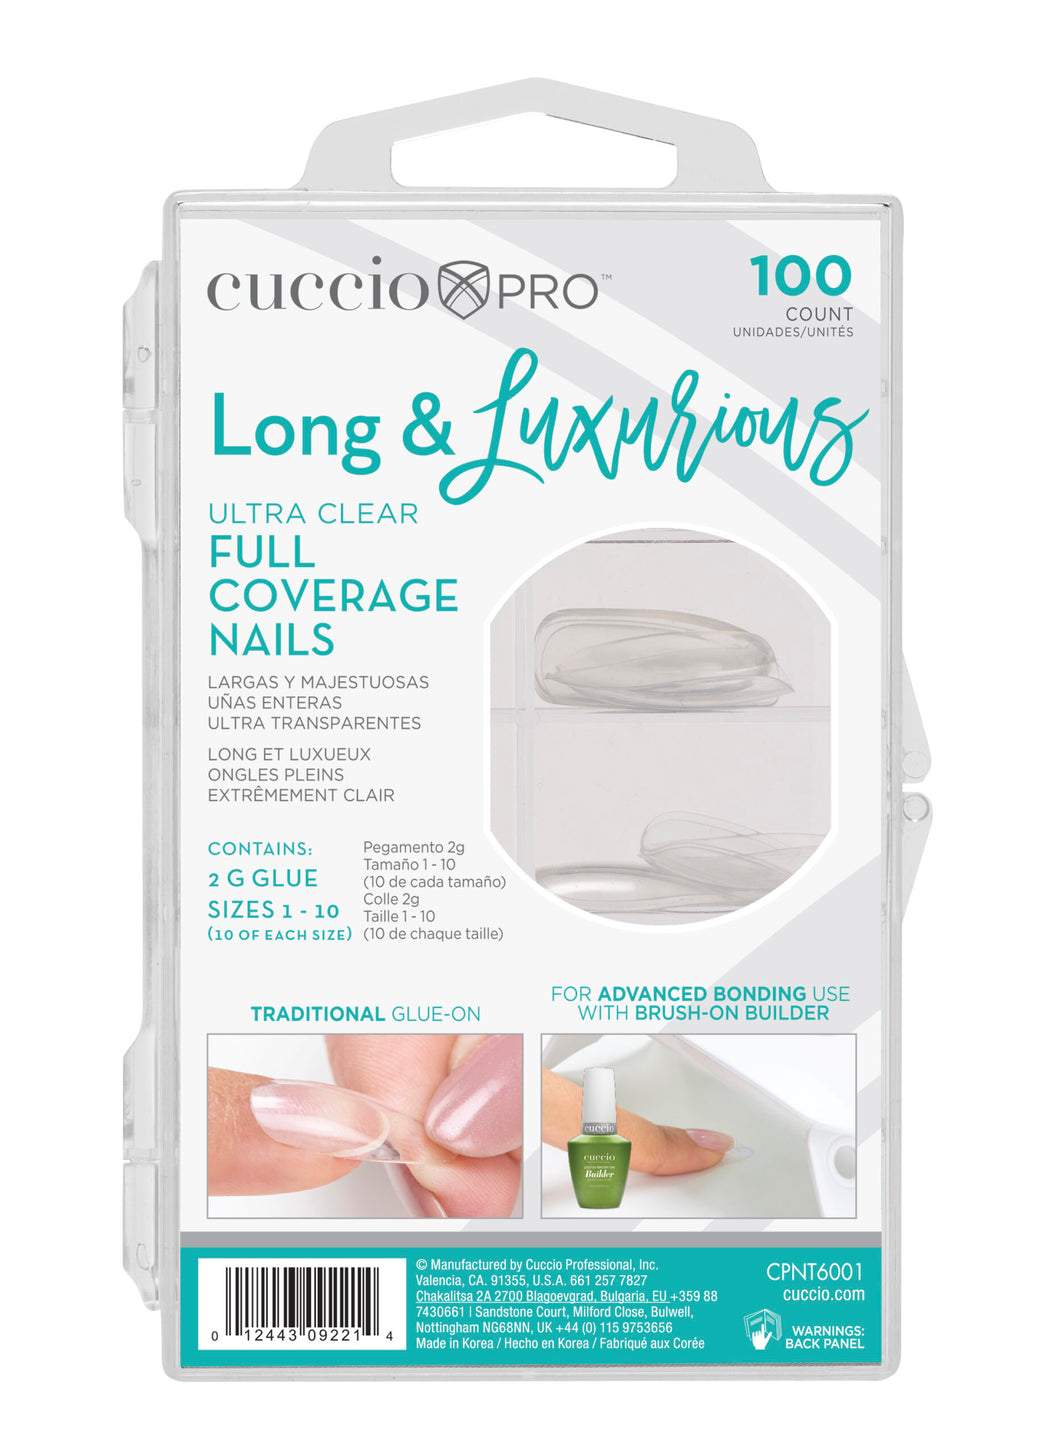 Long & Luxurious Ultra Clear Full Cover Tips 100ct